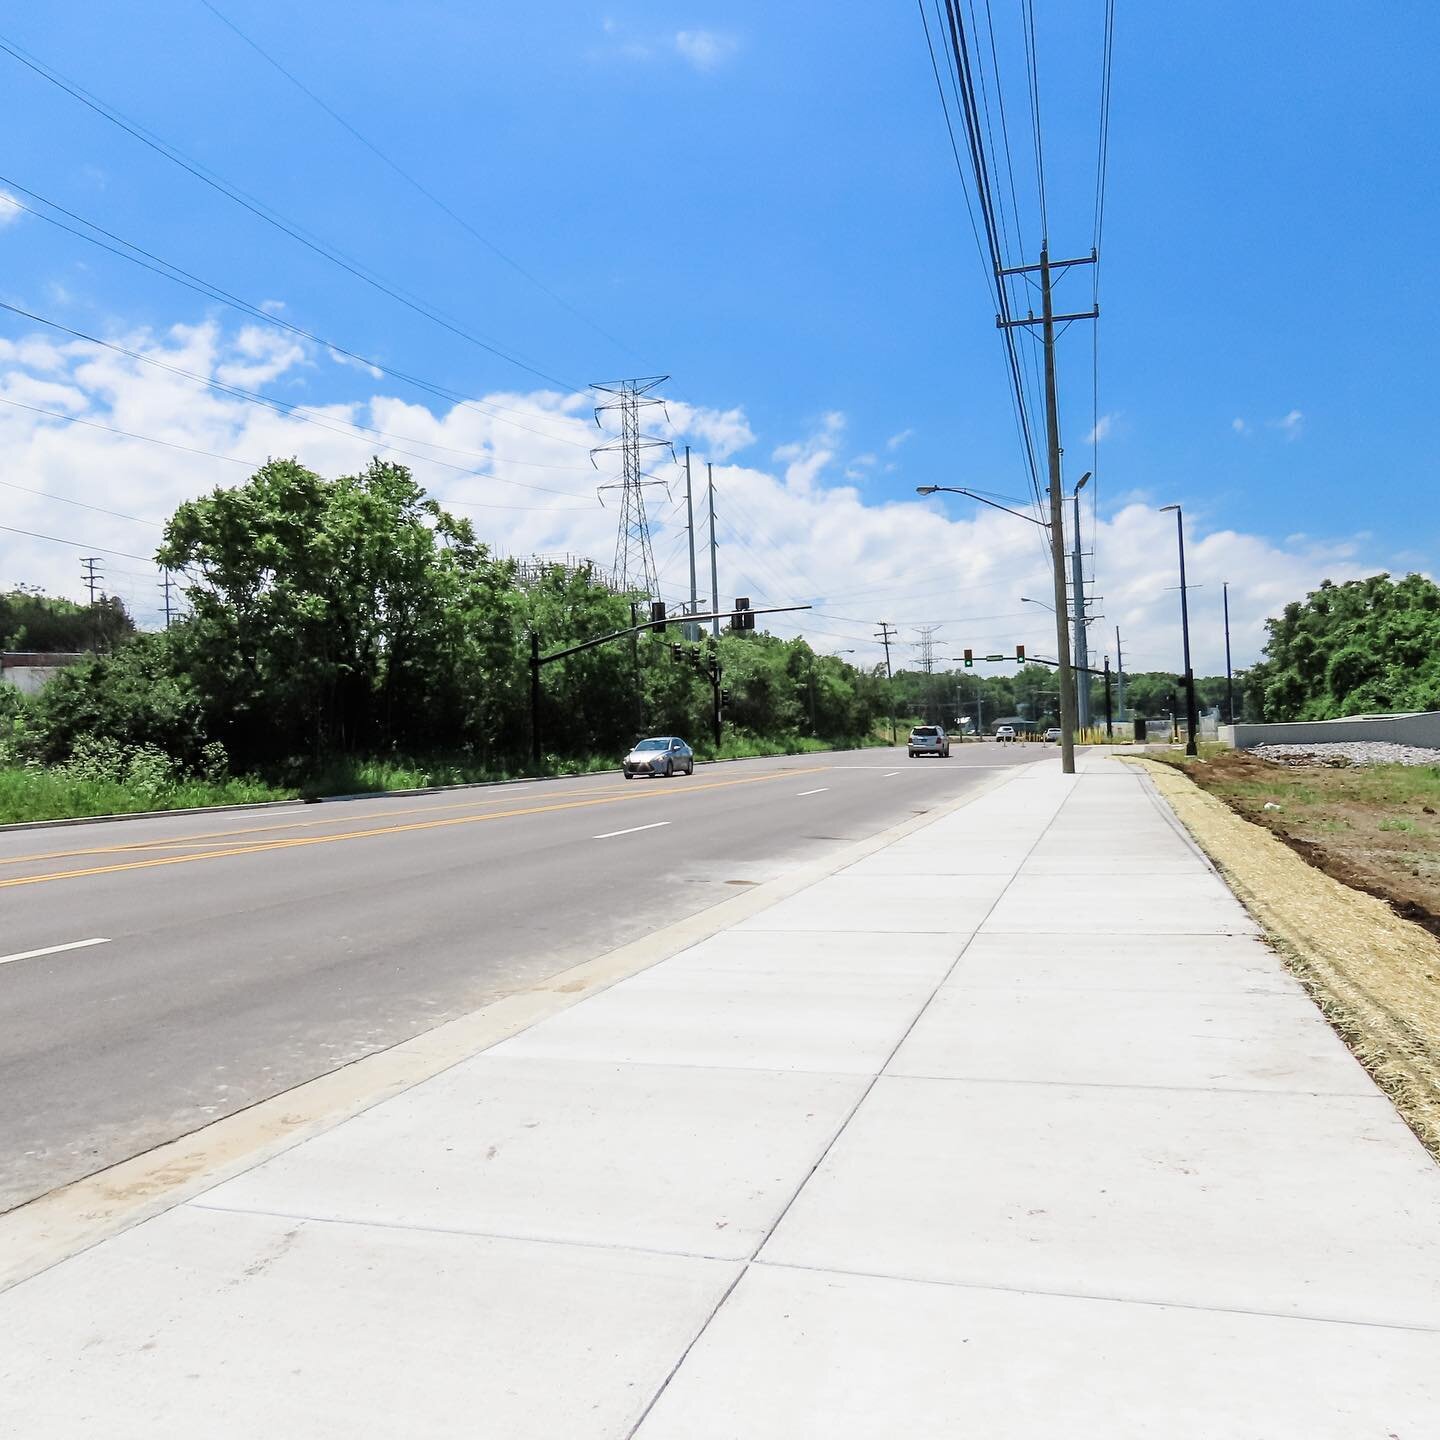 Friday Job Status:
&bull;Craighead Phase 2 is continuing along, some are already being used 🚶
&bull; Millwood Drive is Complete! It connects apartments and other buildings to businesses along Murfreesboro Pike. 
&bull;Broadway is expected to be comp